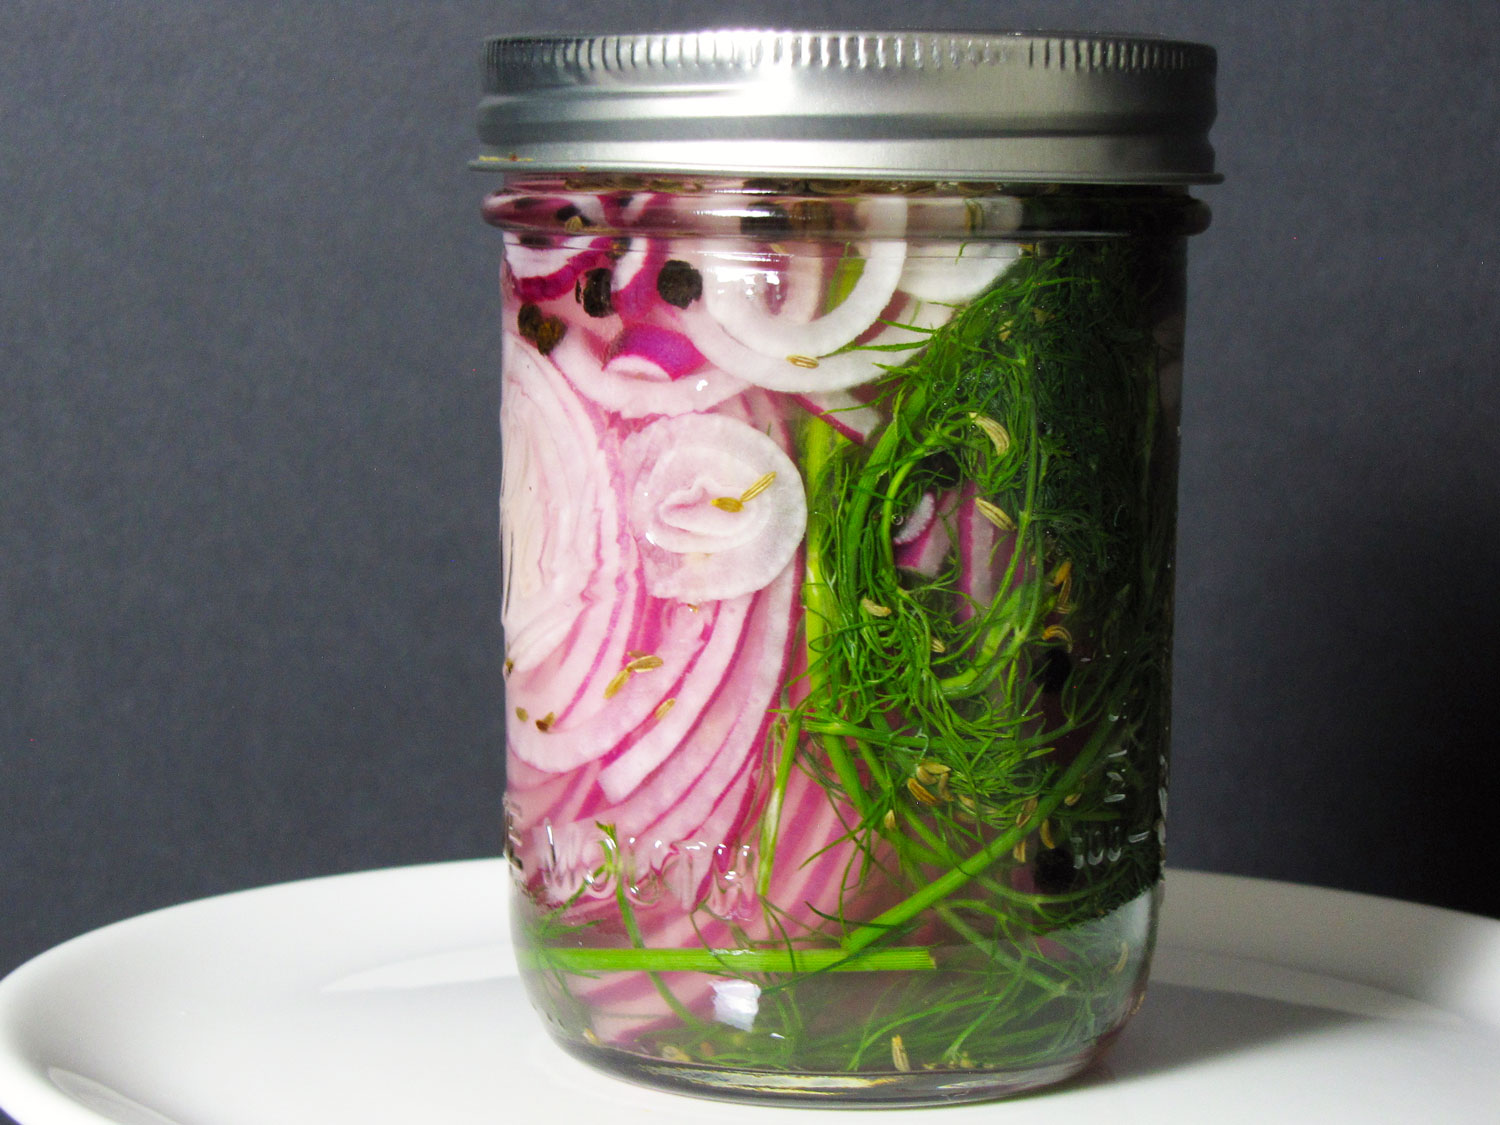 Refrigerator Quick Pickled Red Onions